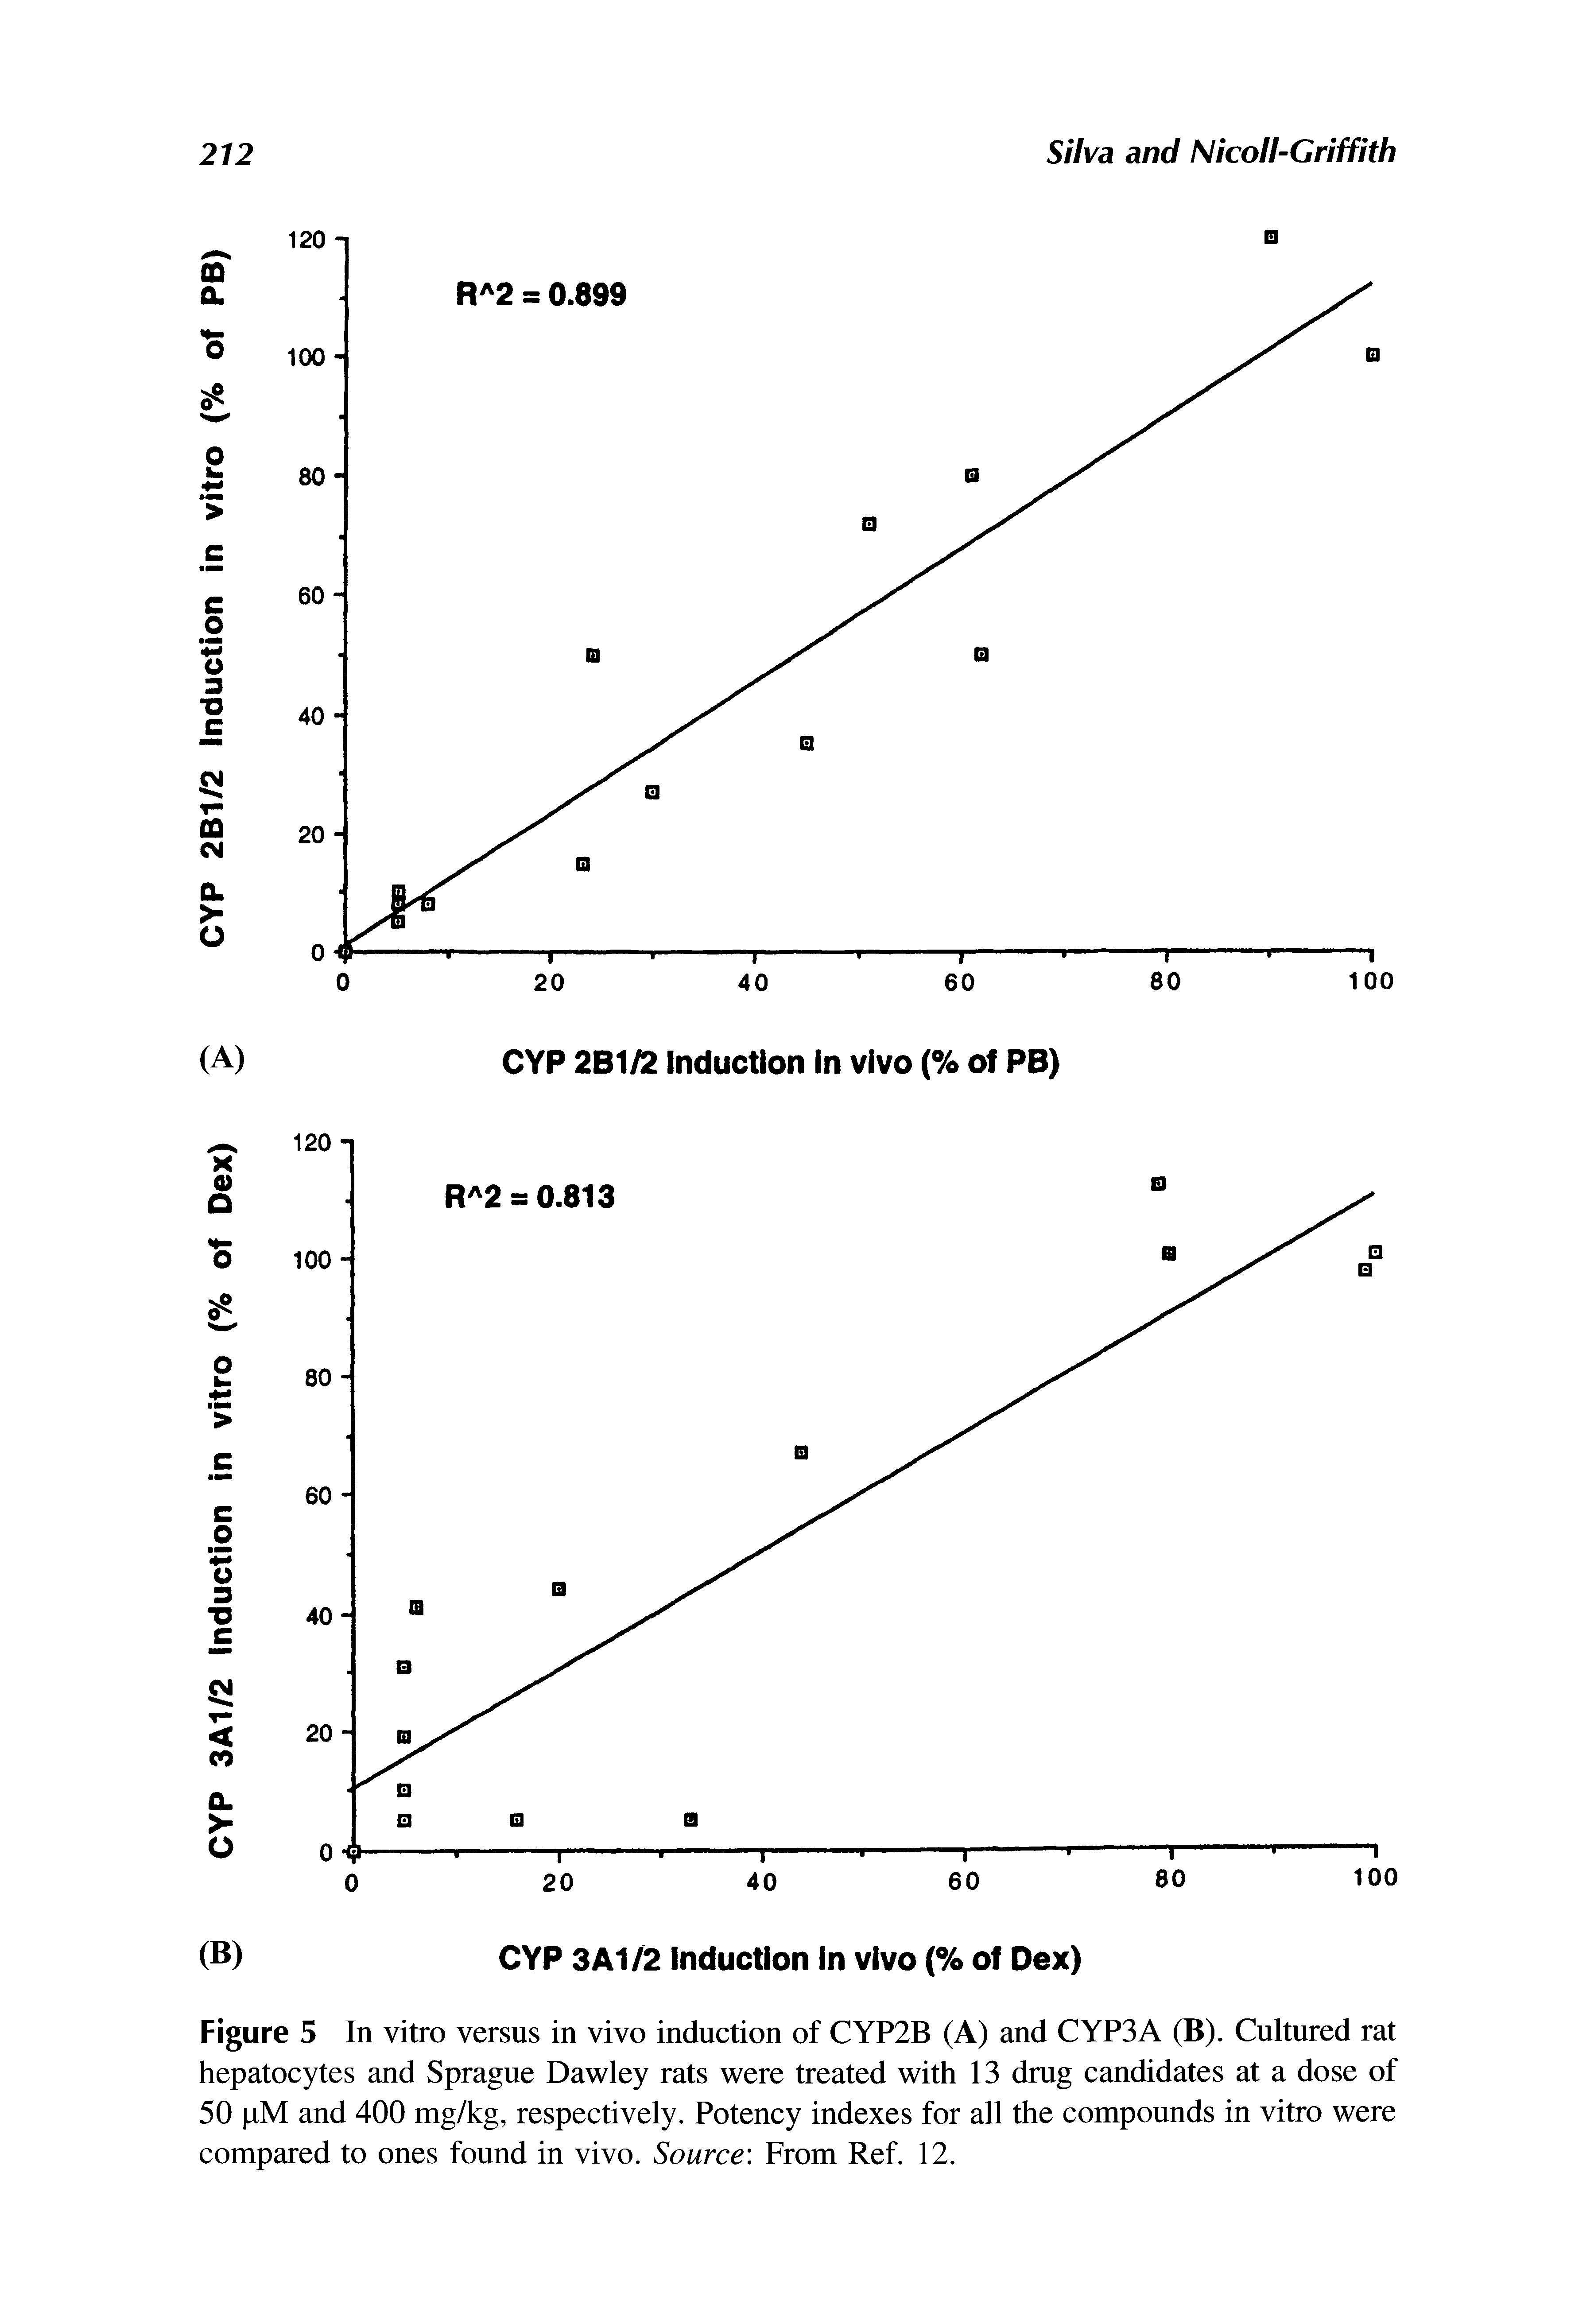 Figure 5 In vitro versus in vivo induction of CYP2B (A) and CYP3A (B). Cultured rat hepatocytes and Sprague Dawley rats were treated with 13 drug candidates at a dose of 50 pM and 400 mg/kg, respectively. Potency indexes for all the compounds in vitro were compared to ones found in vivo. Source From Ref. 12.